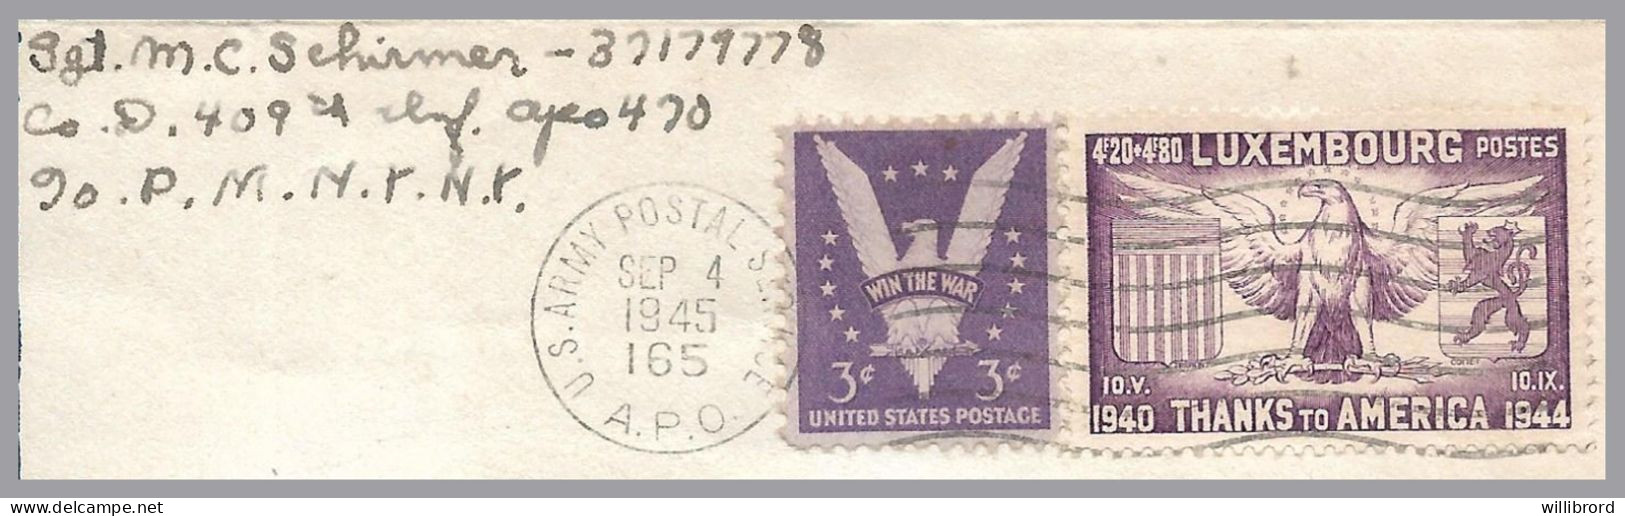 LUXEMBOURG - USA 1945 - US APO 165 [St. Villary En Caux, France] - 4.20F+4.80F Thanks To America With 3c US Victory - Covers & Documents